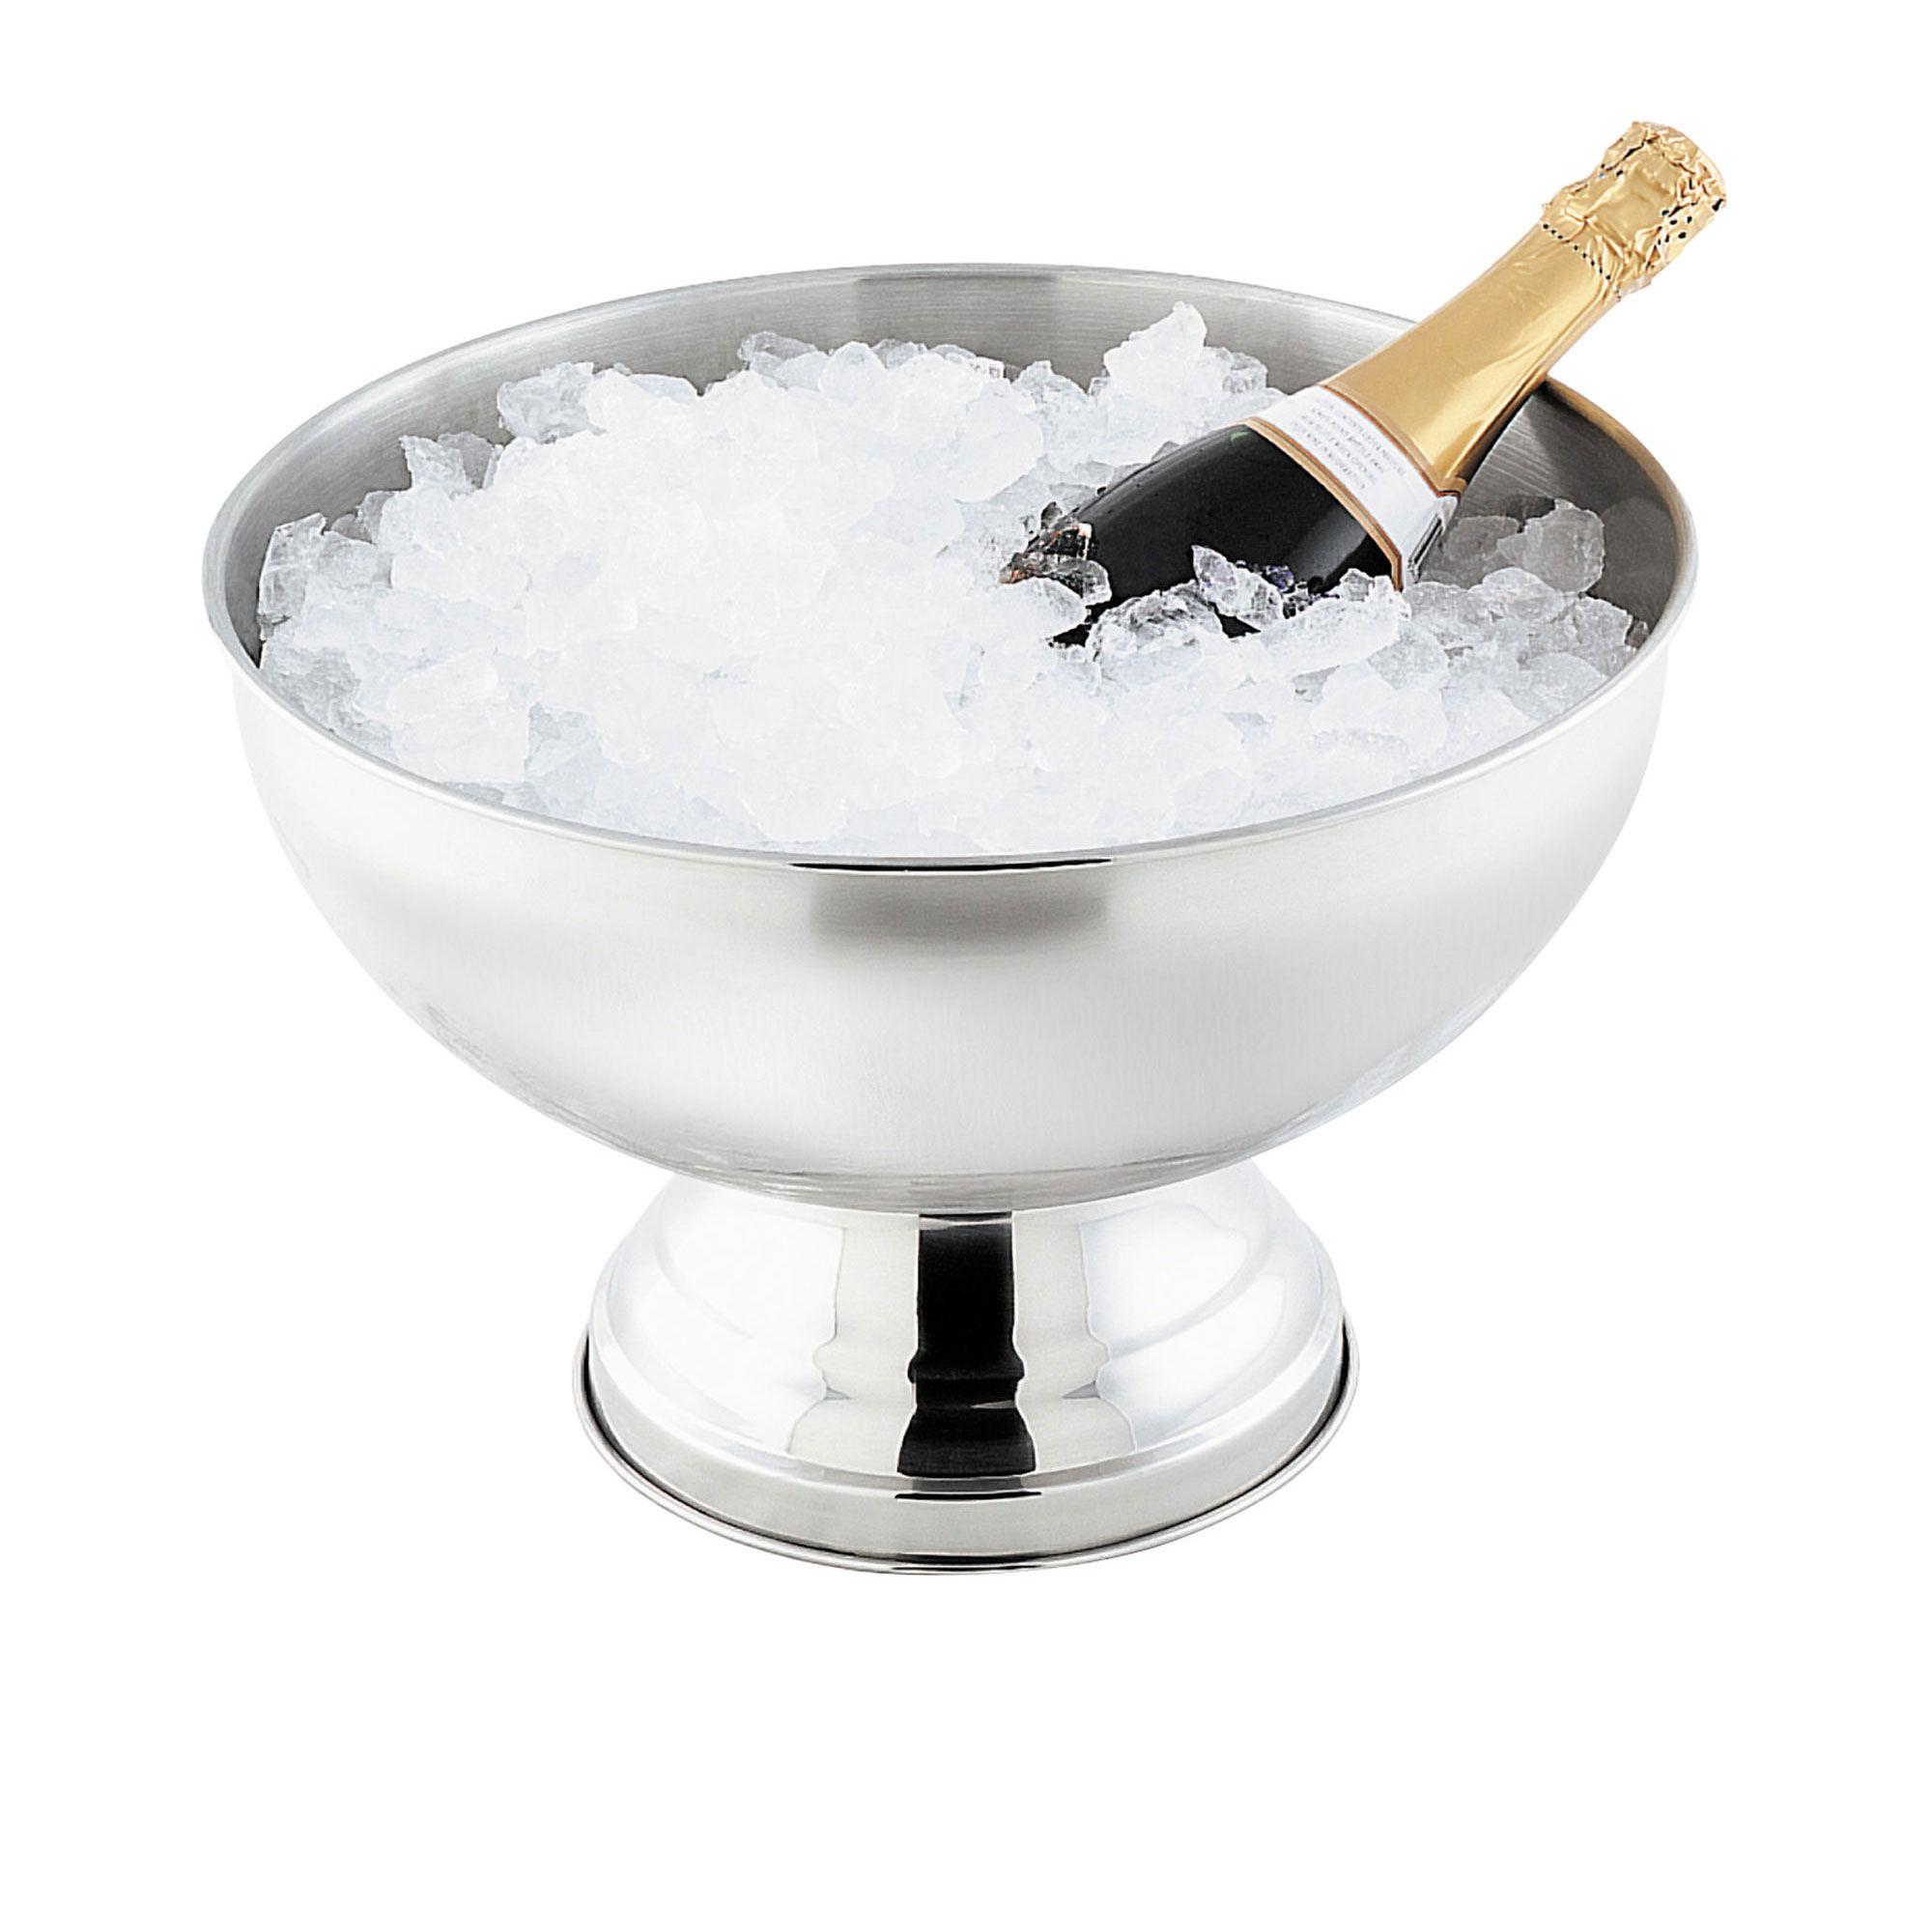 Avanti Champagne and Punch Bowl 9L Image 1